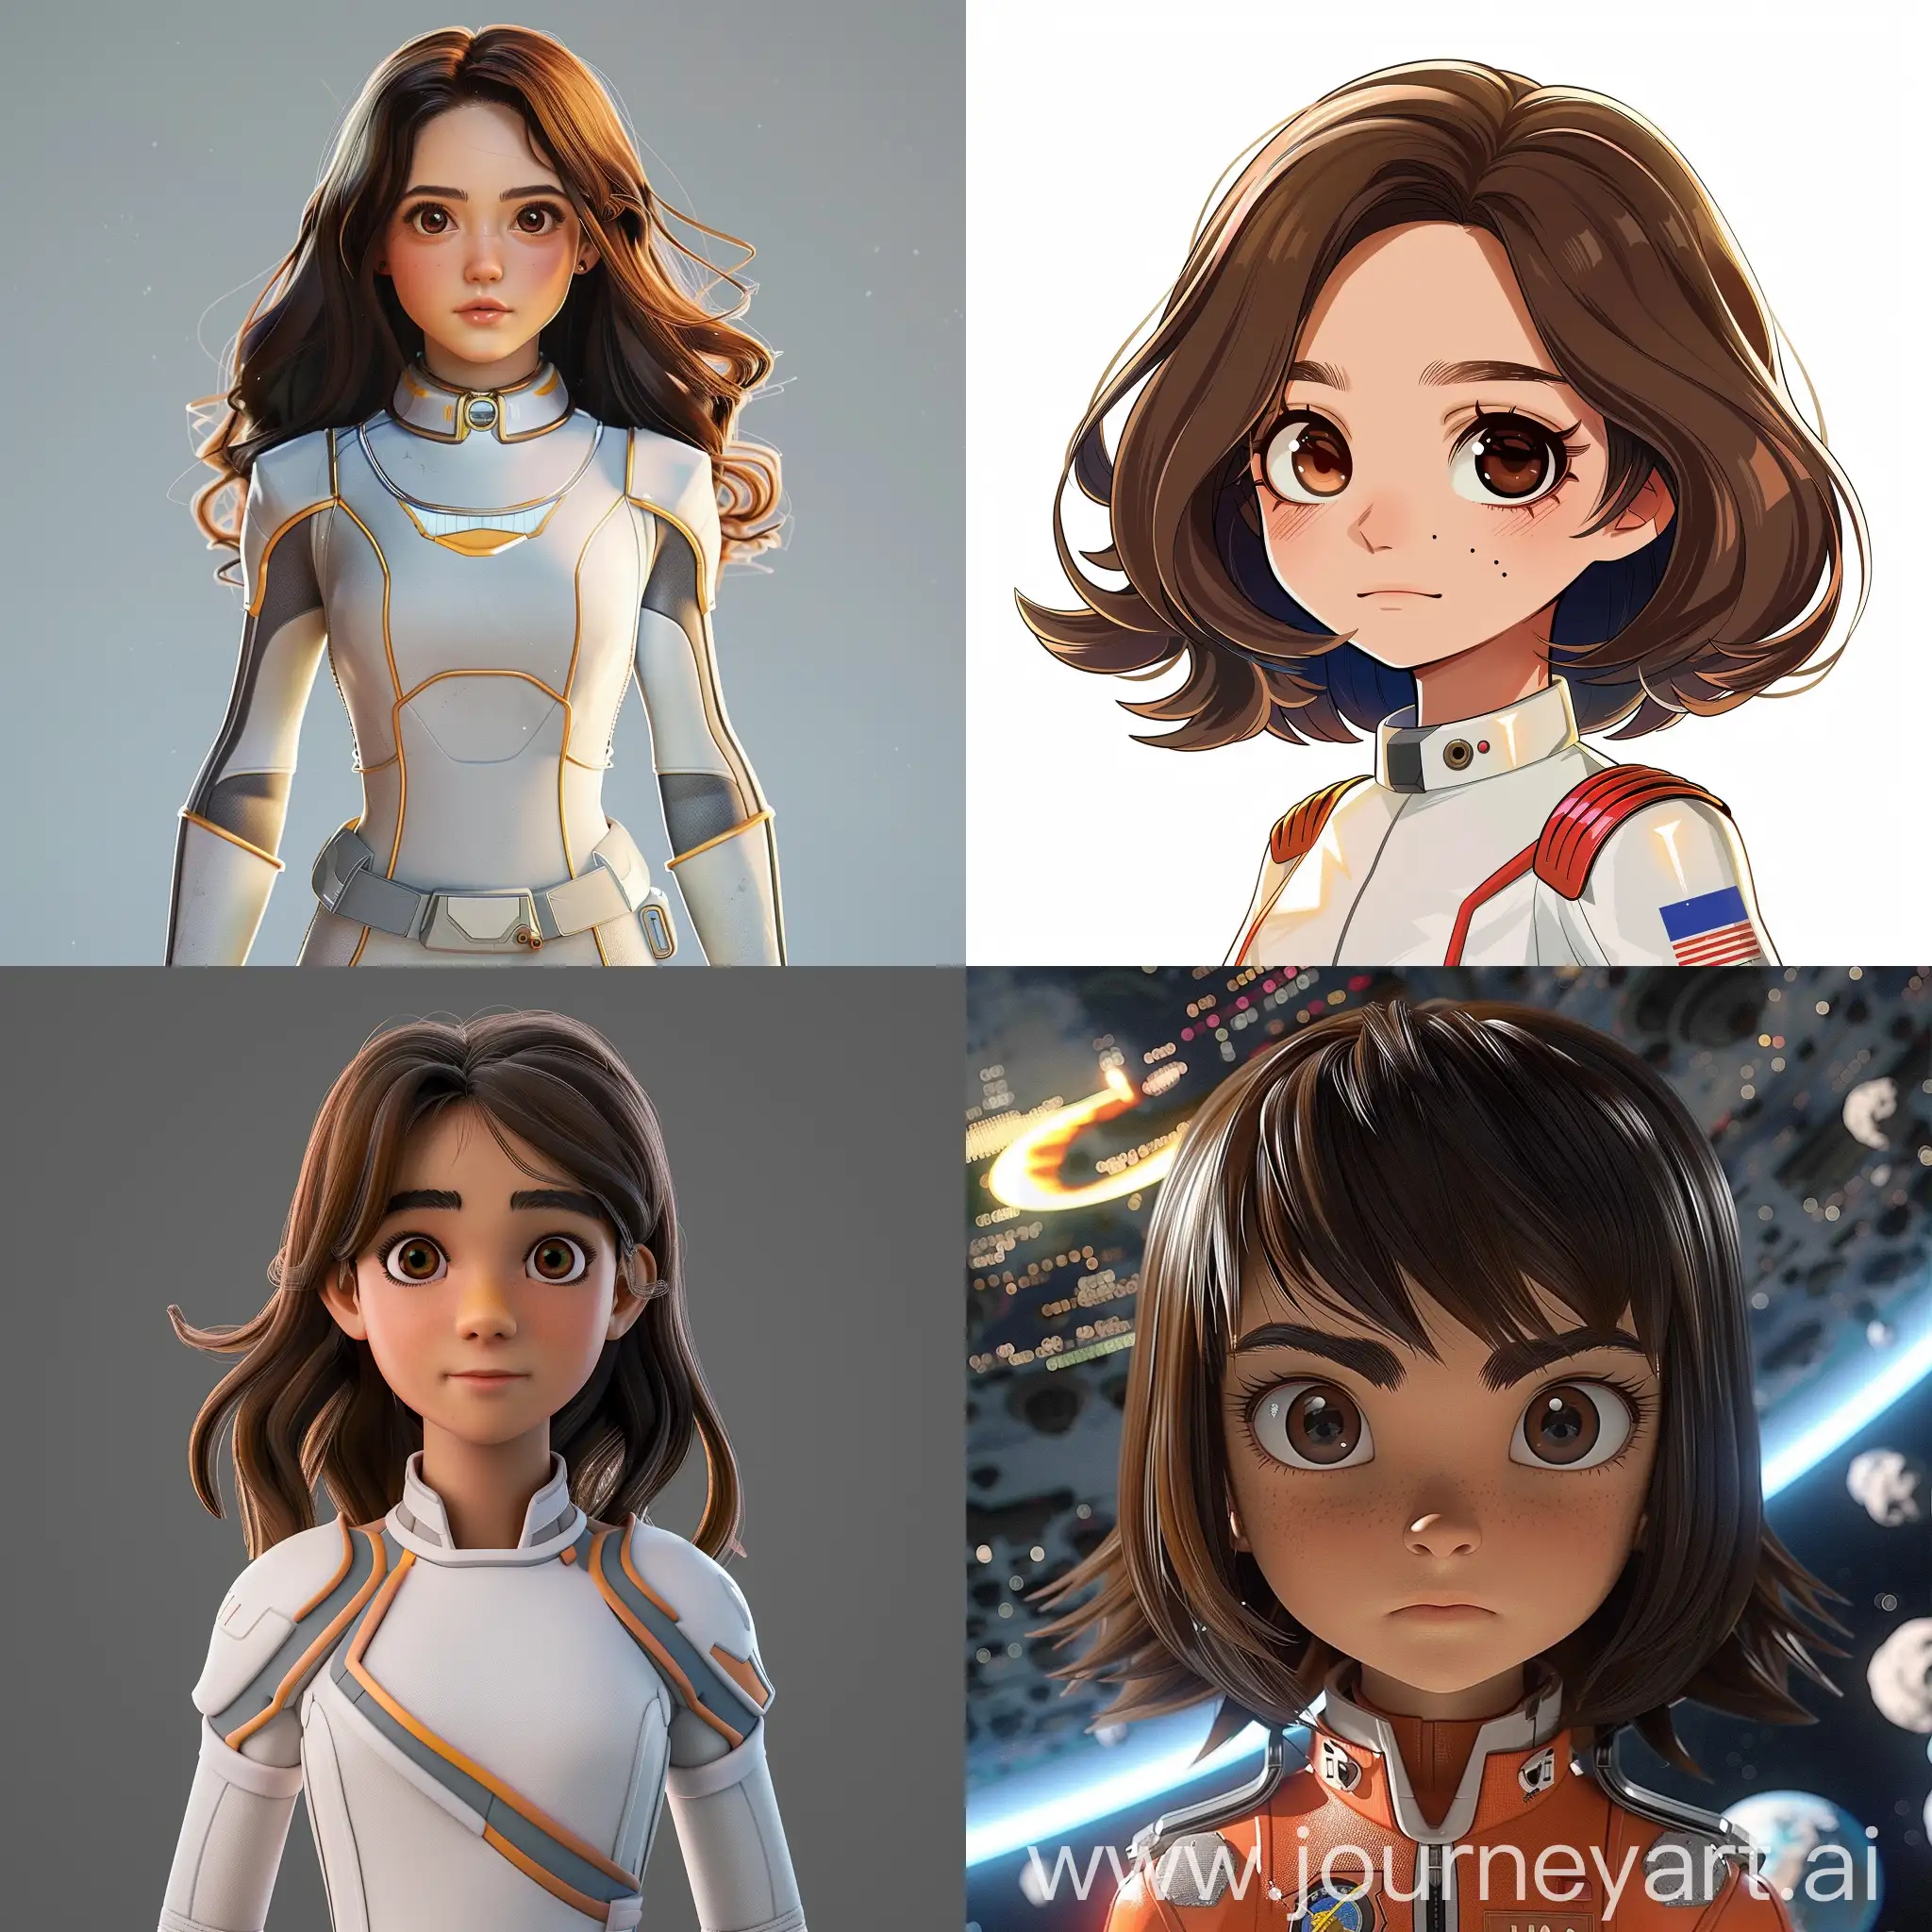 Adventurous-BrownHaired-Space-Ranger-Girl-with-WaistLength-Hair-and-Brown-Eyes